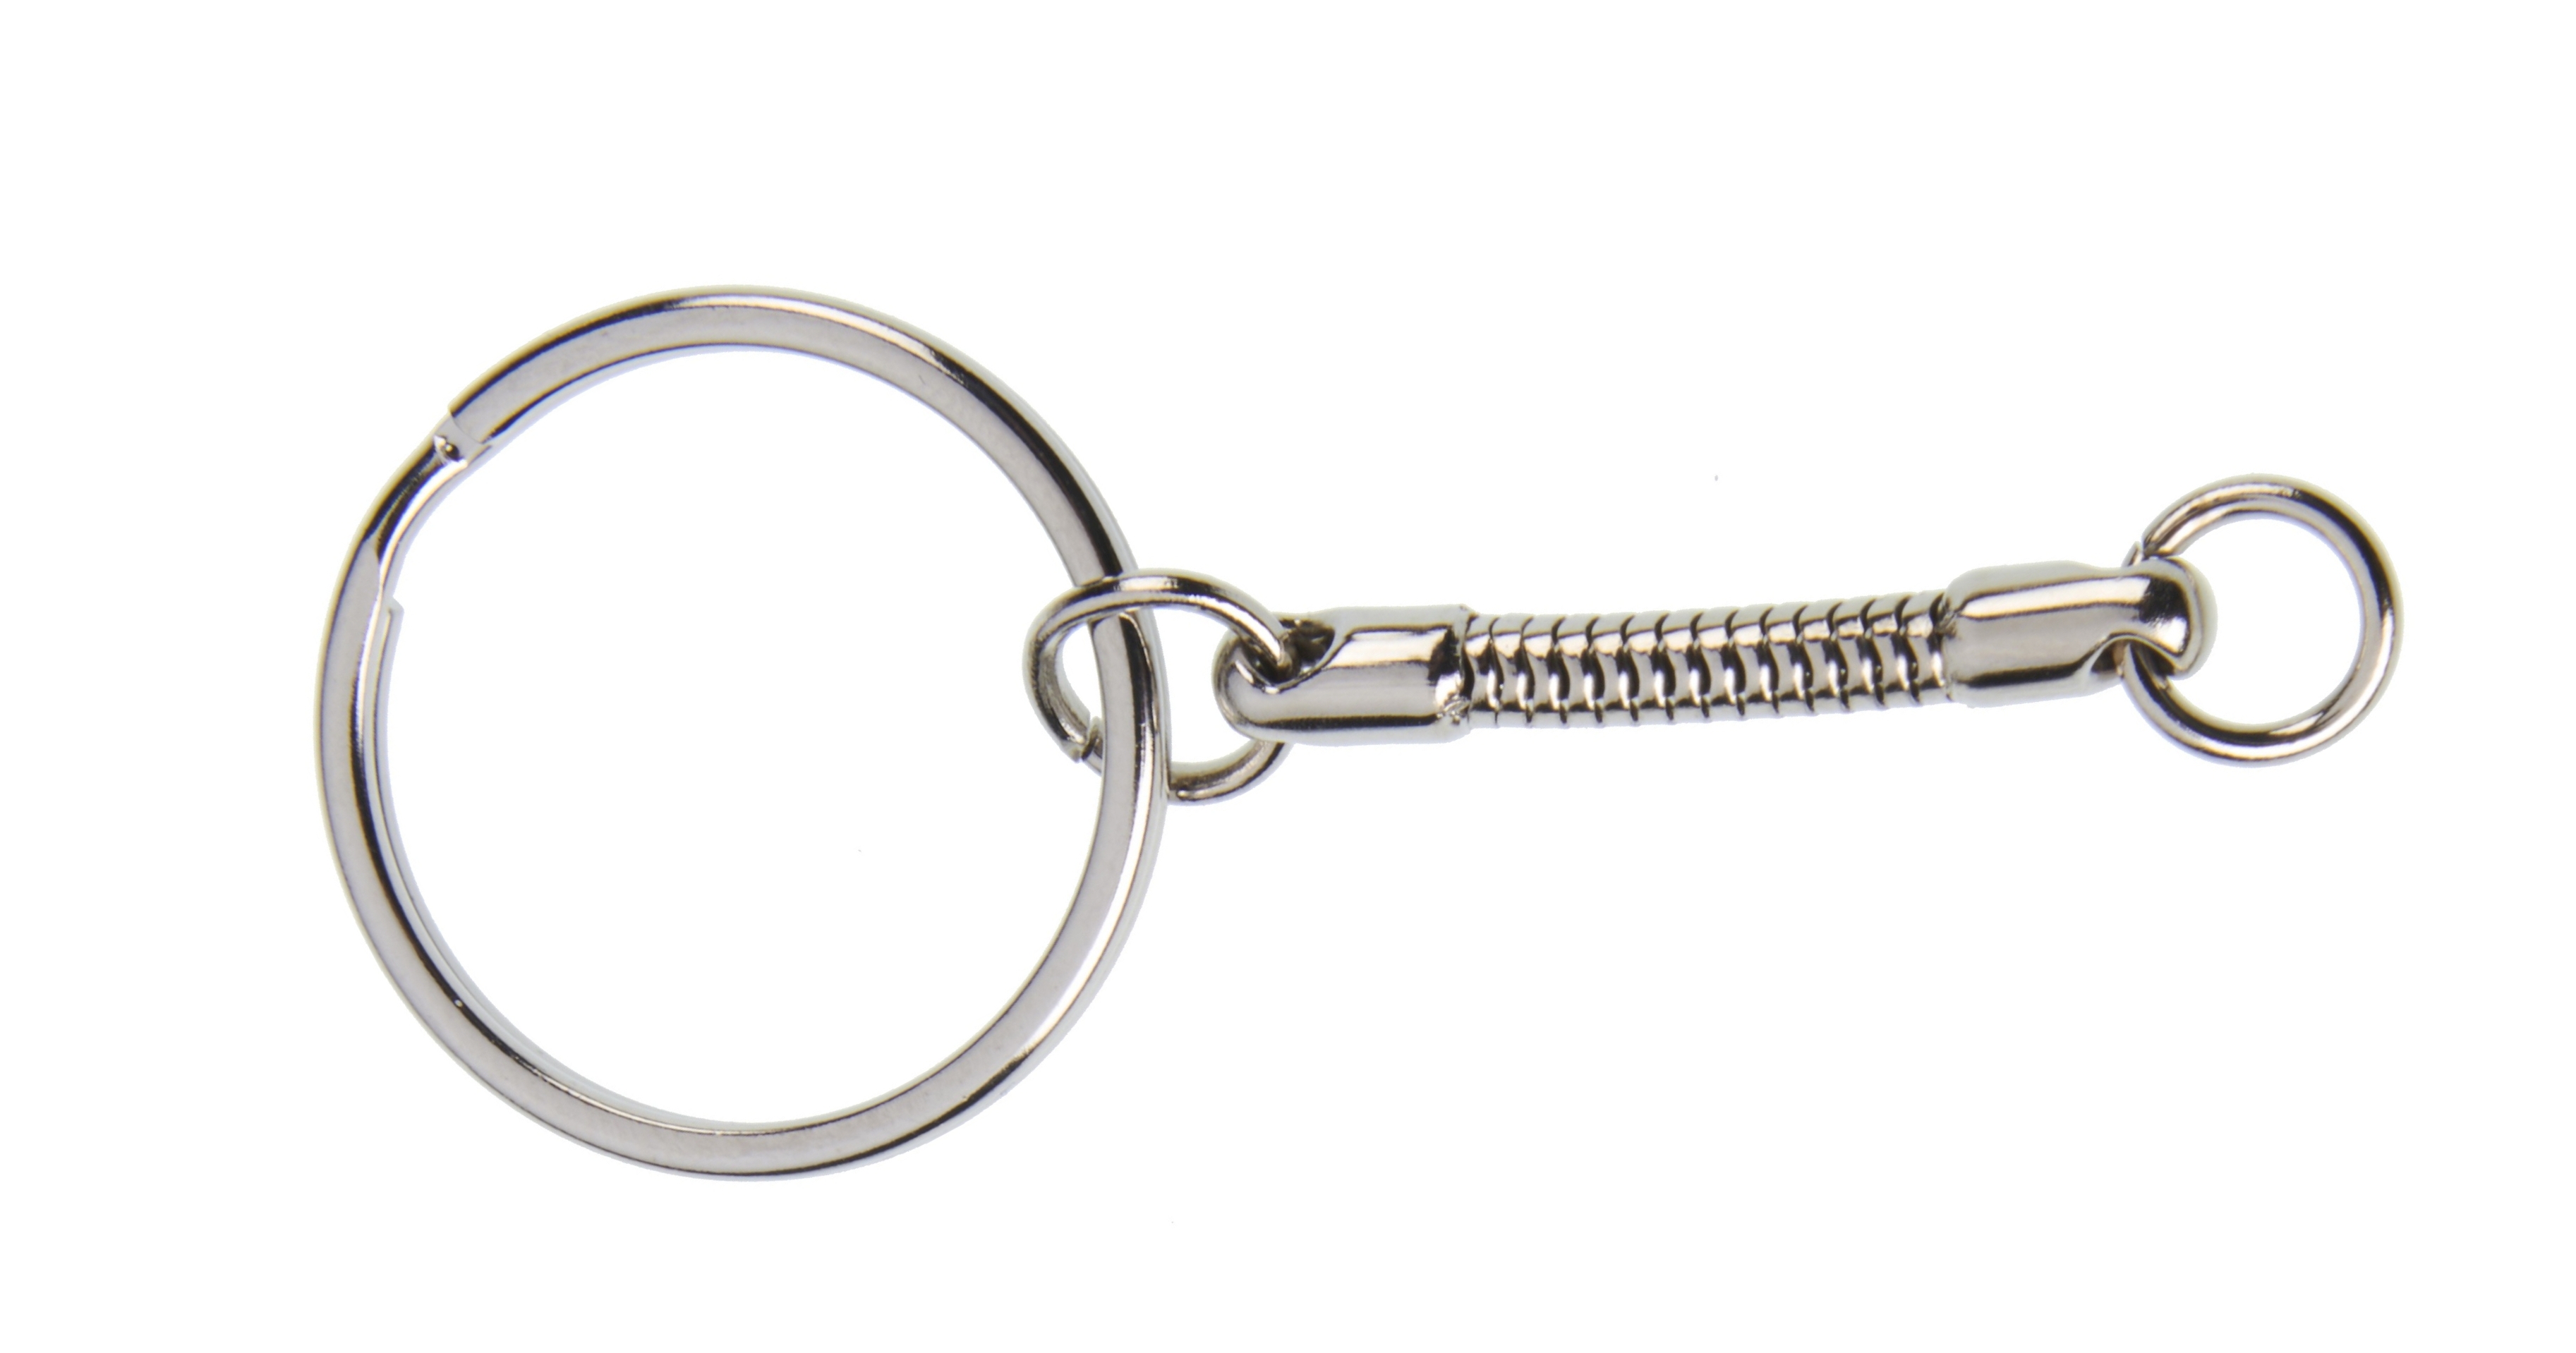 Liroyal 50pcs 25MM Split Key Chain Ring Connector Keychain with Nickel Plated Keychains Keys Holder 